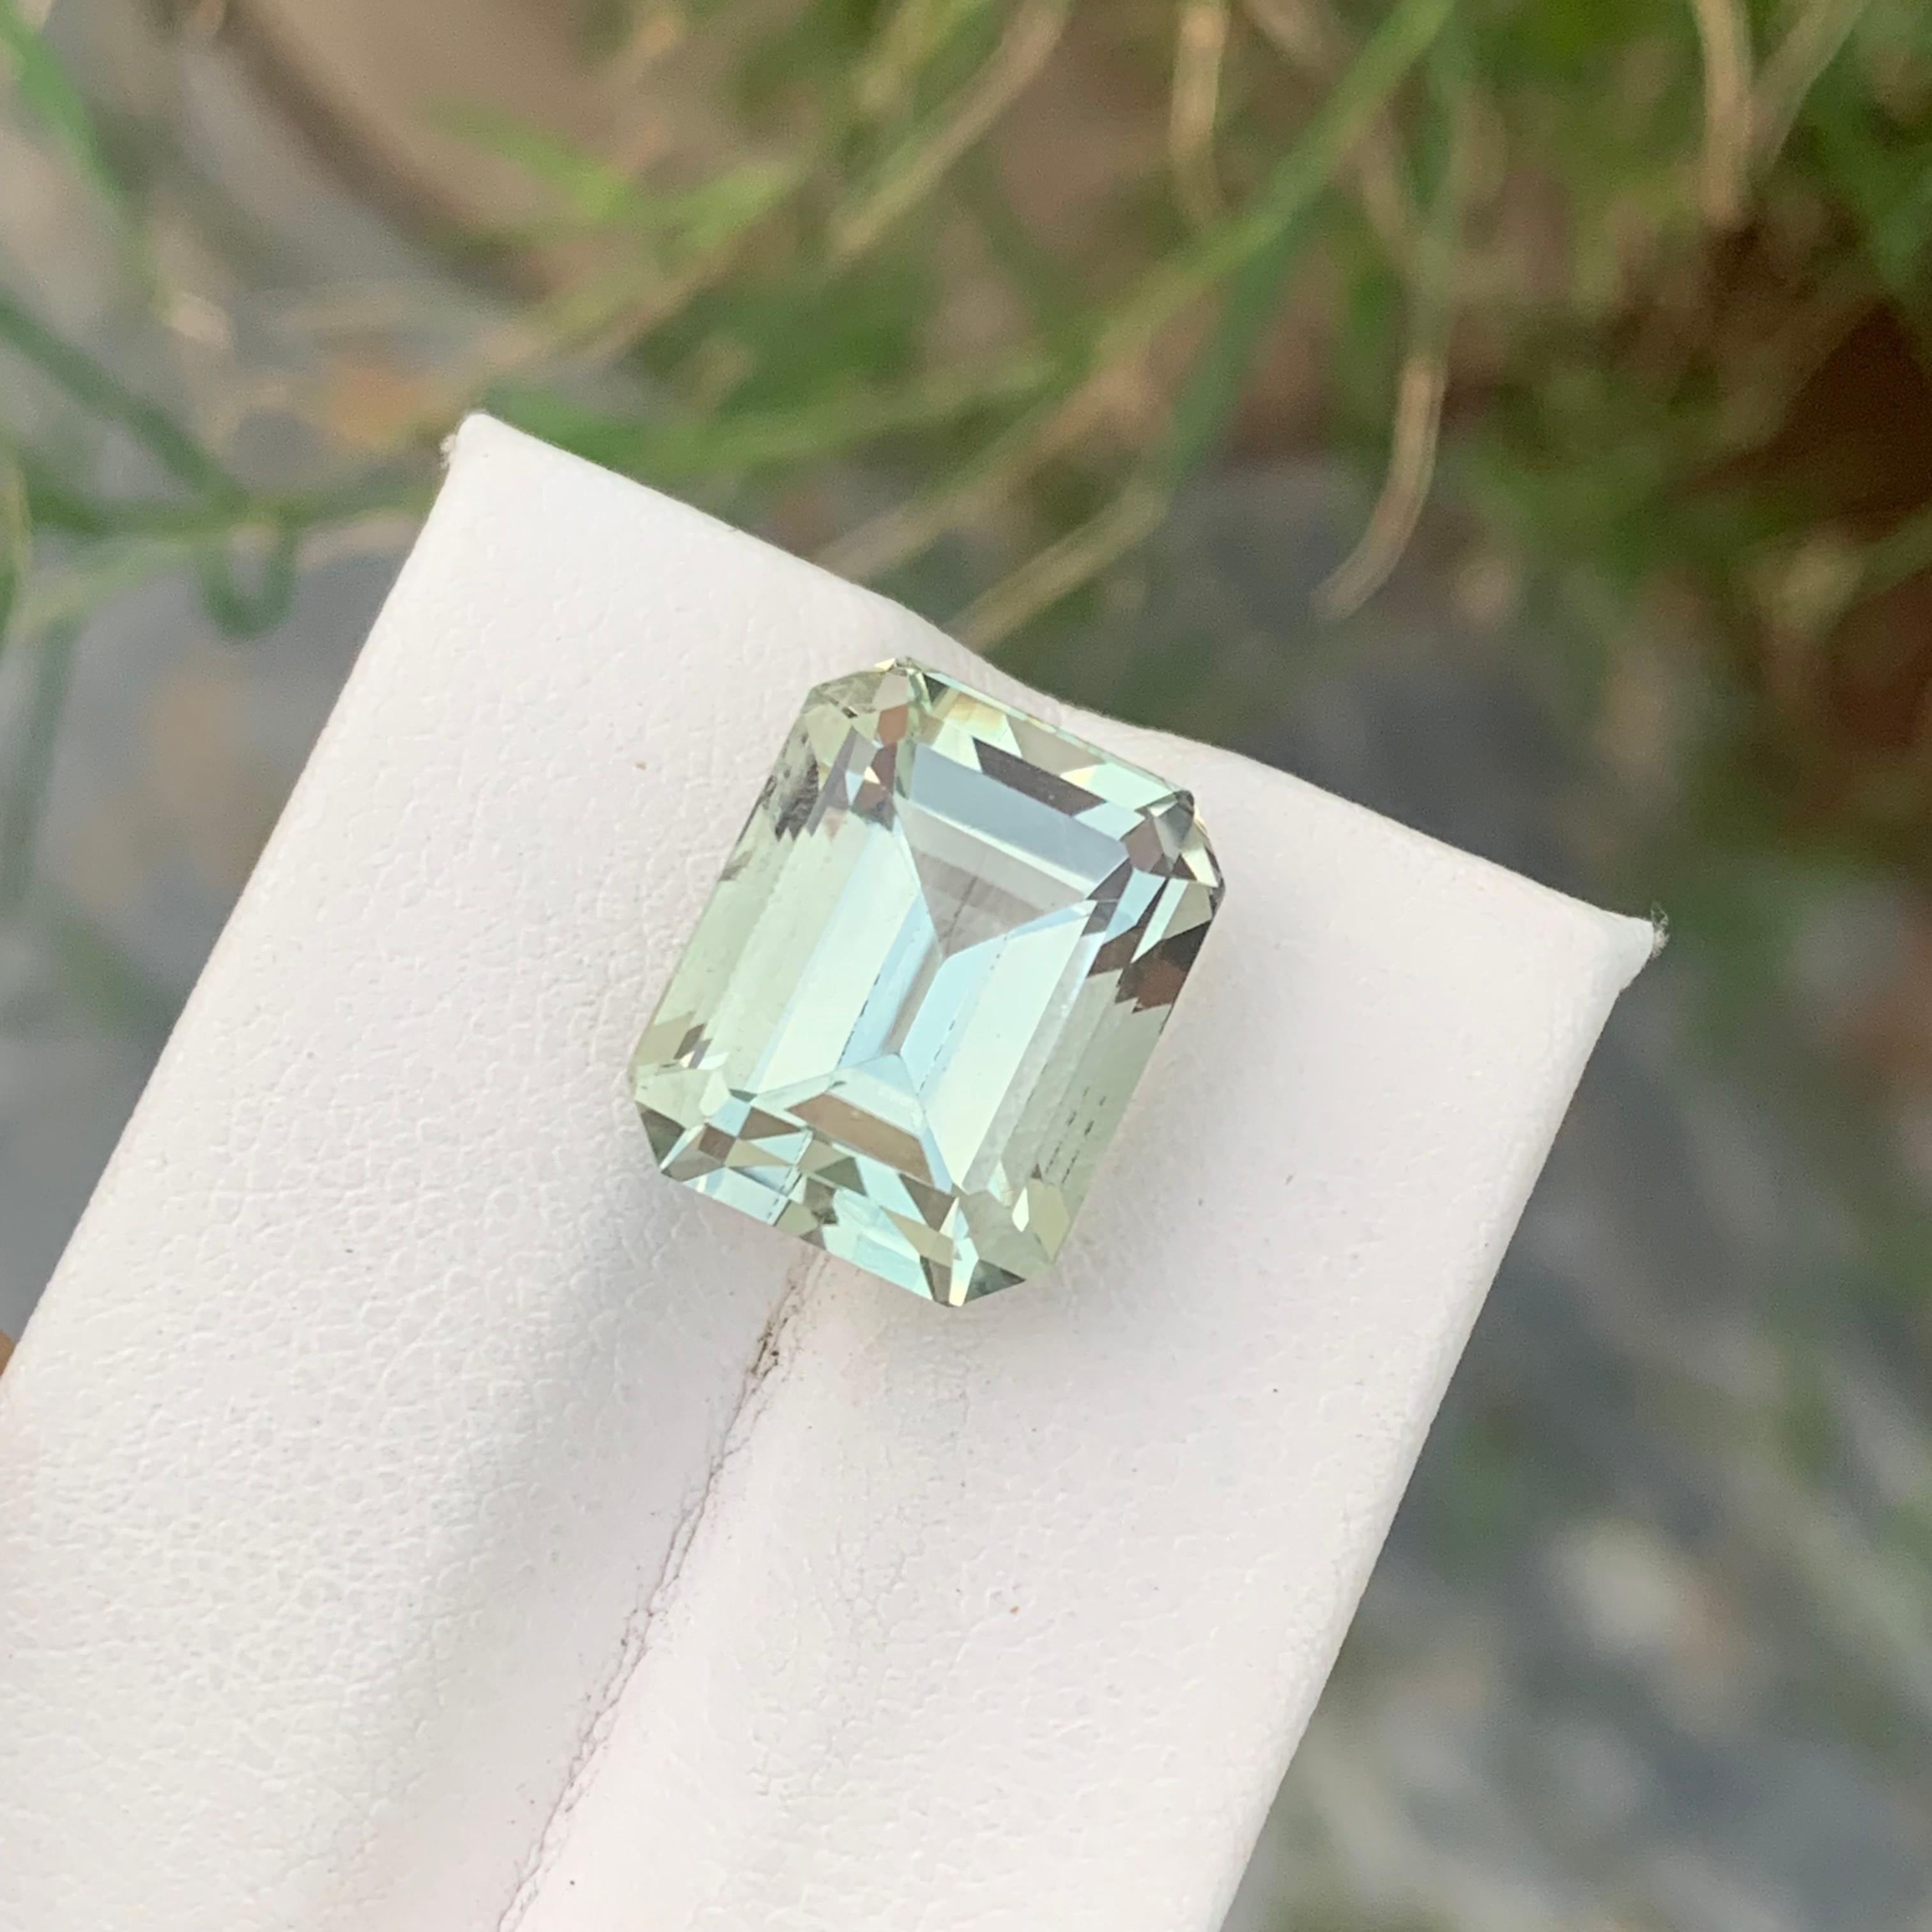 green amethyst ring meaning